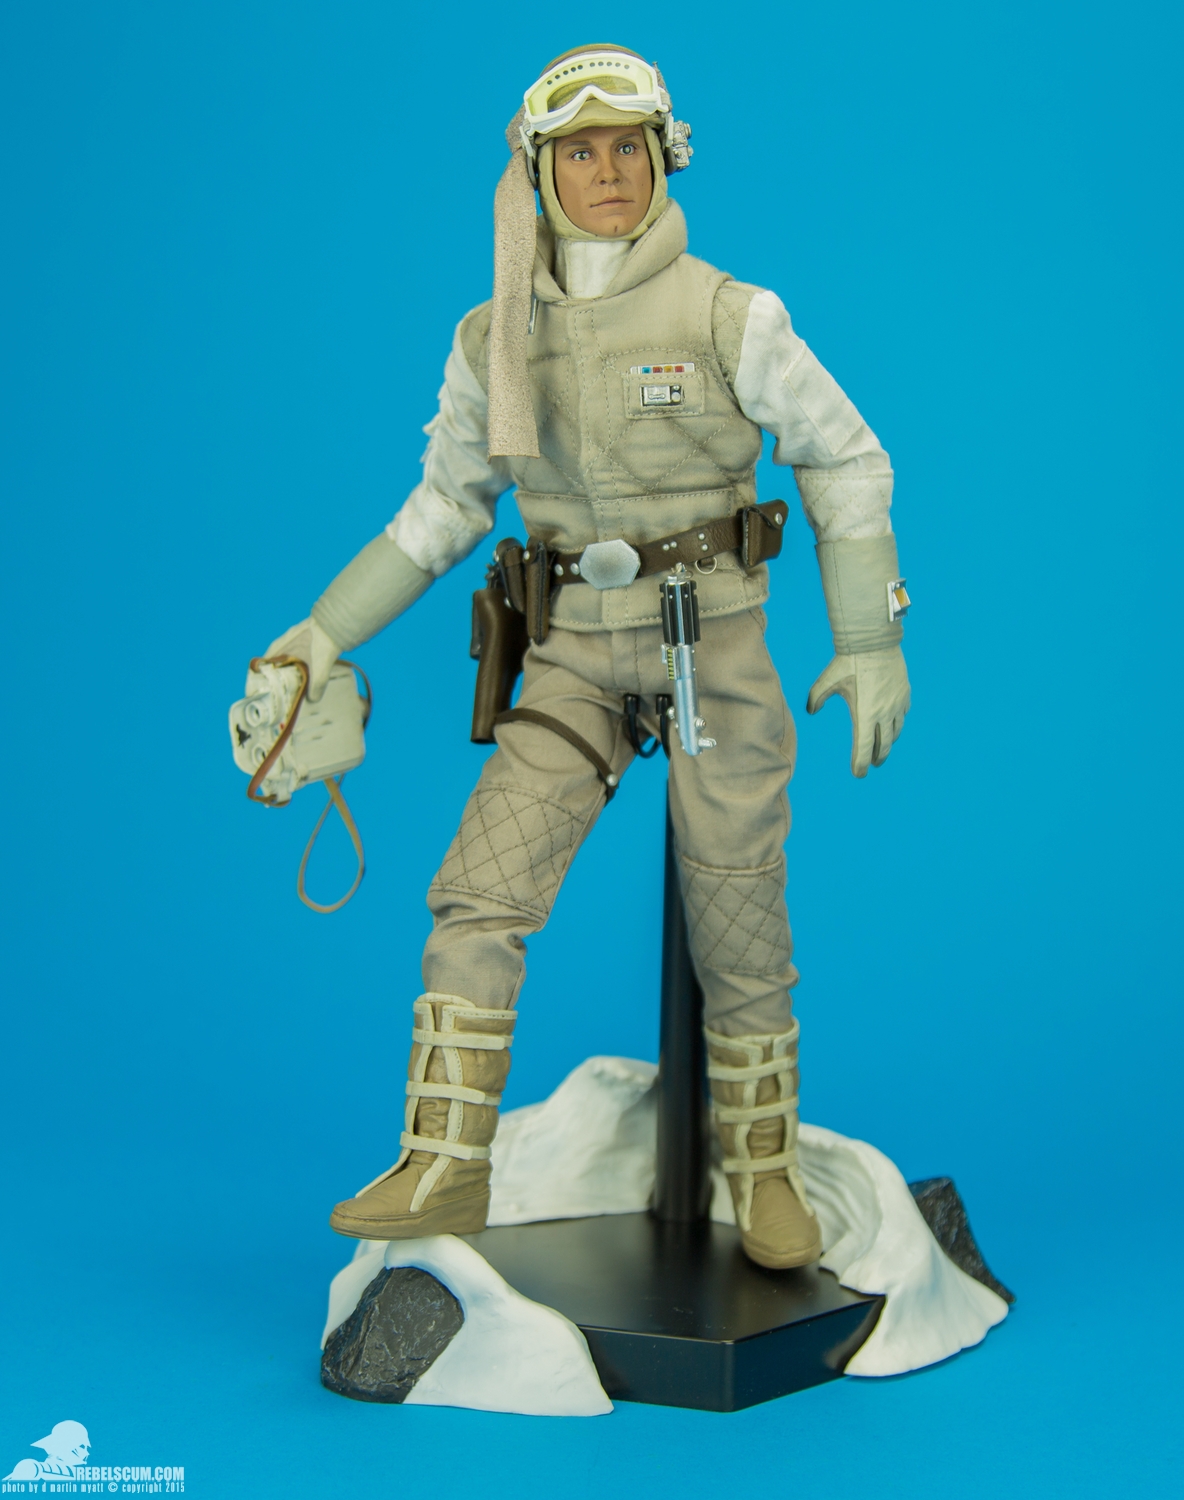 Luke-Skywalker-Hoth-Sixth-Scale-Sideshow-Collectibles-Star-Wars-046.jpg